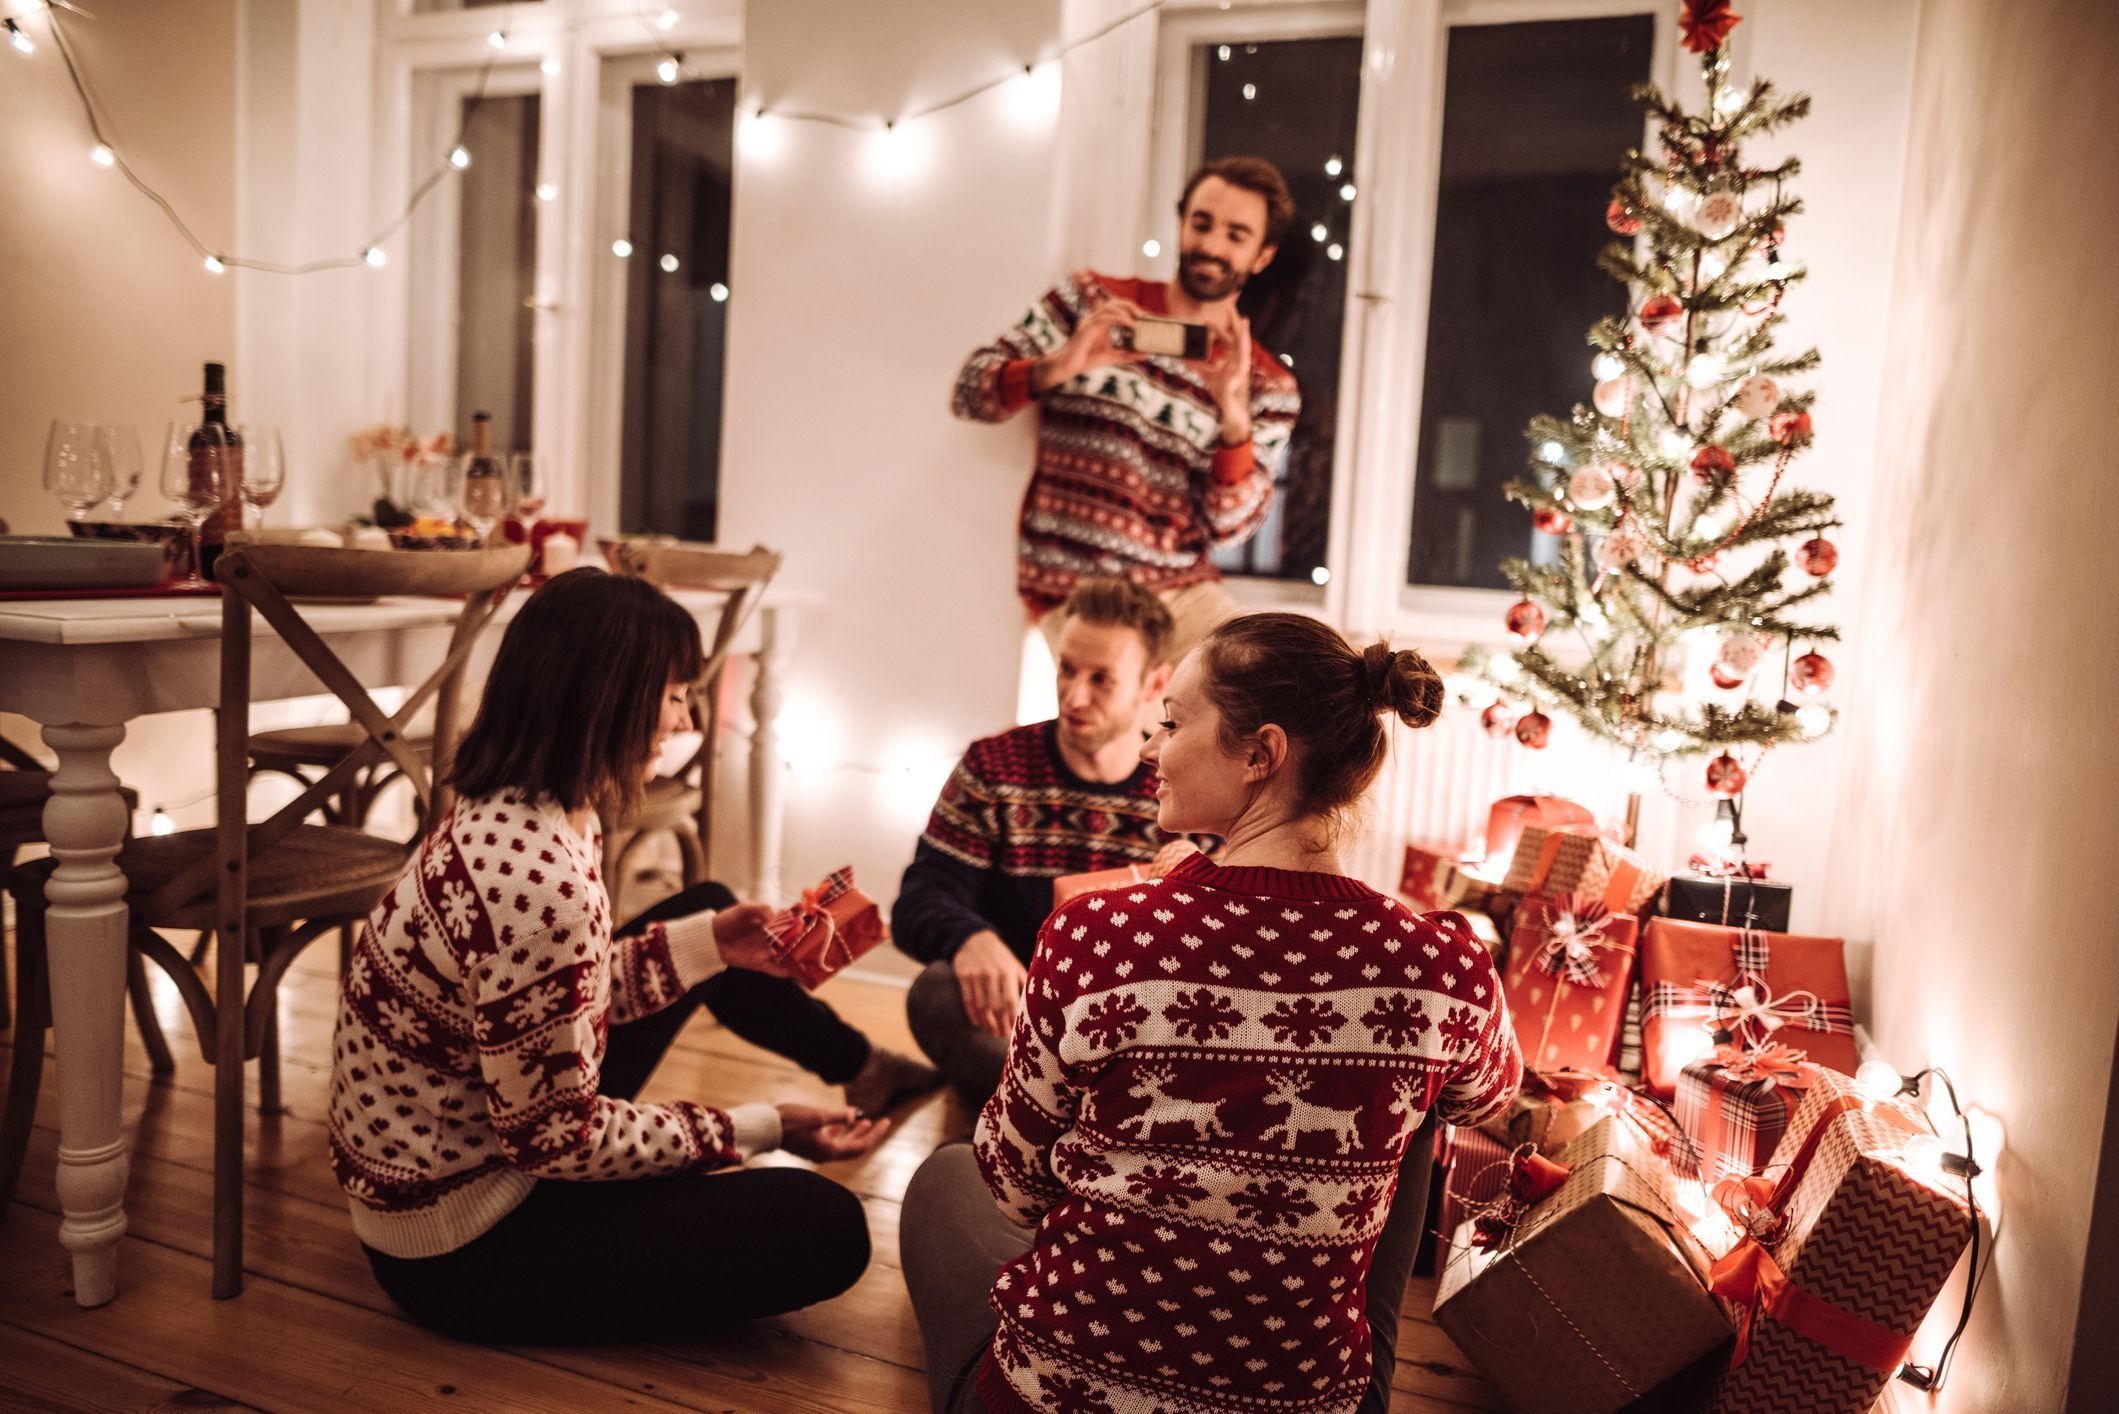 40 Best Christmas Eve Traditions - Things to Do on Christmas Eve